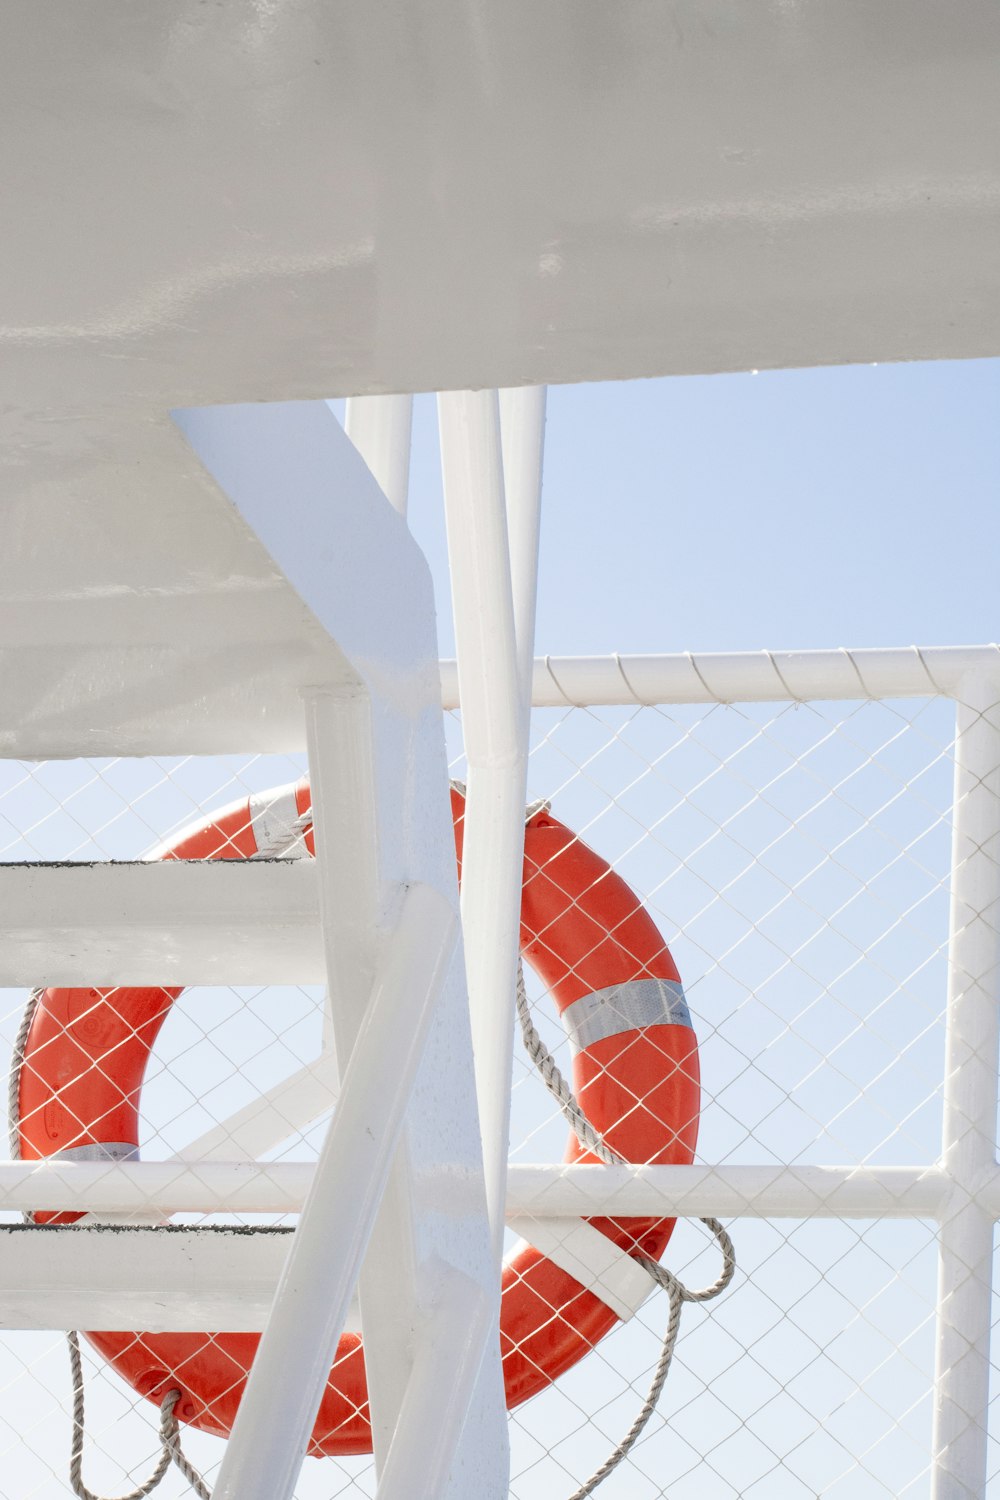 a life preserver on the side of a boat